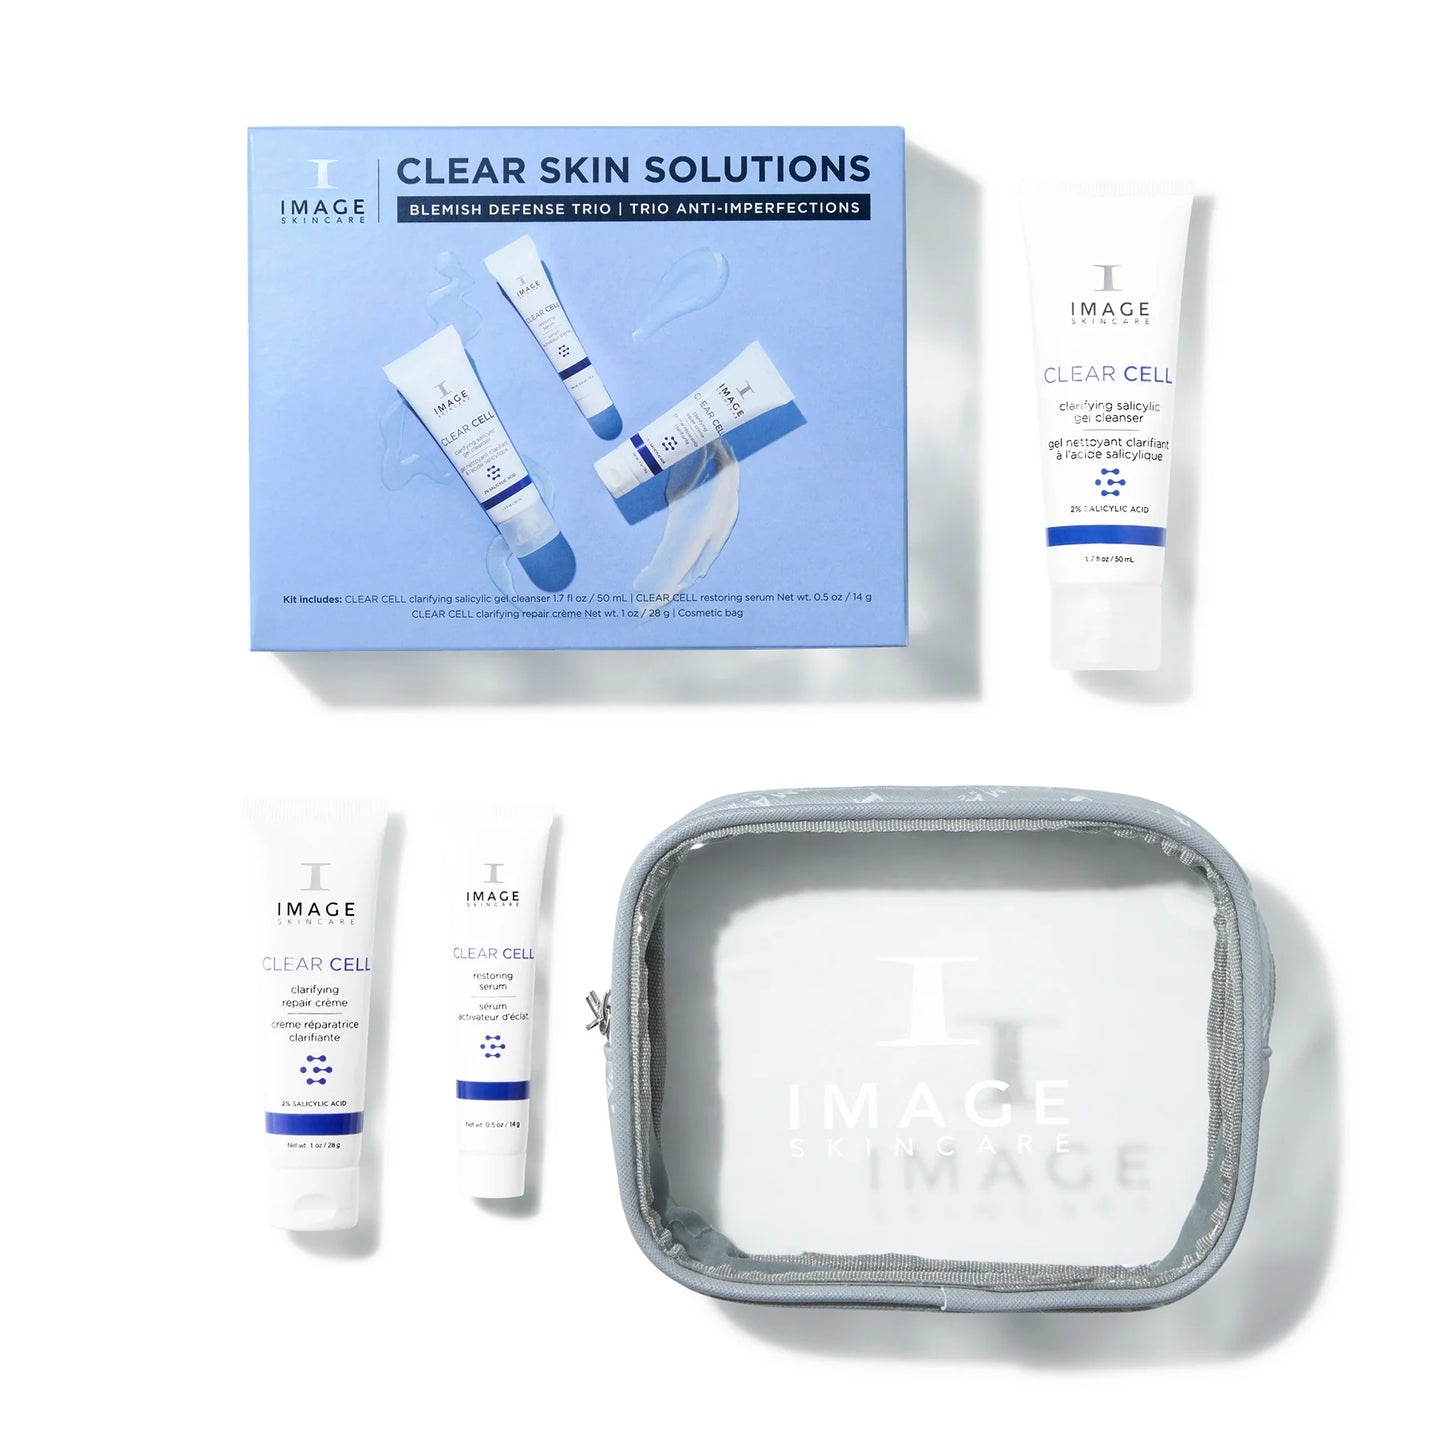 Clear Skin Solutions blemish defense trio